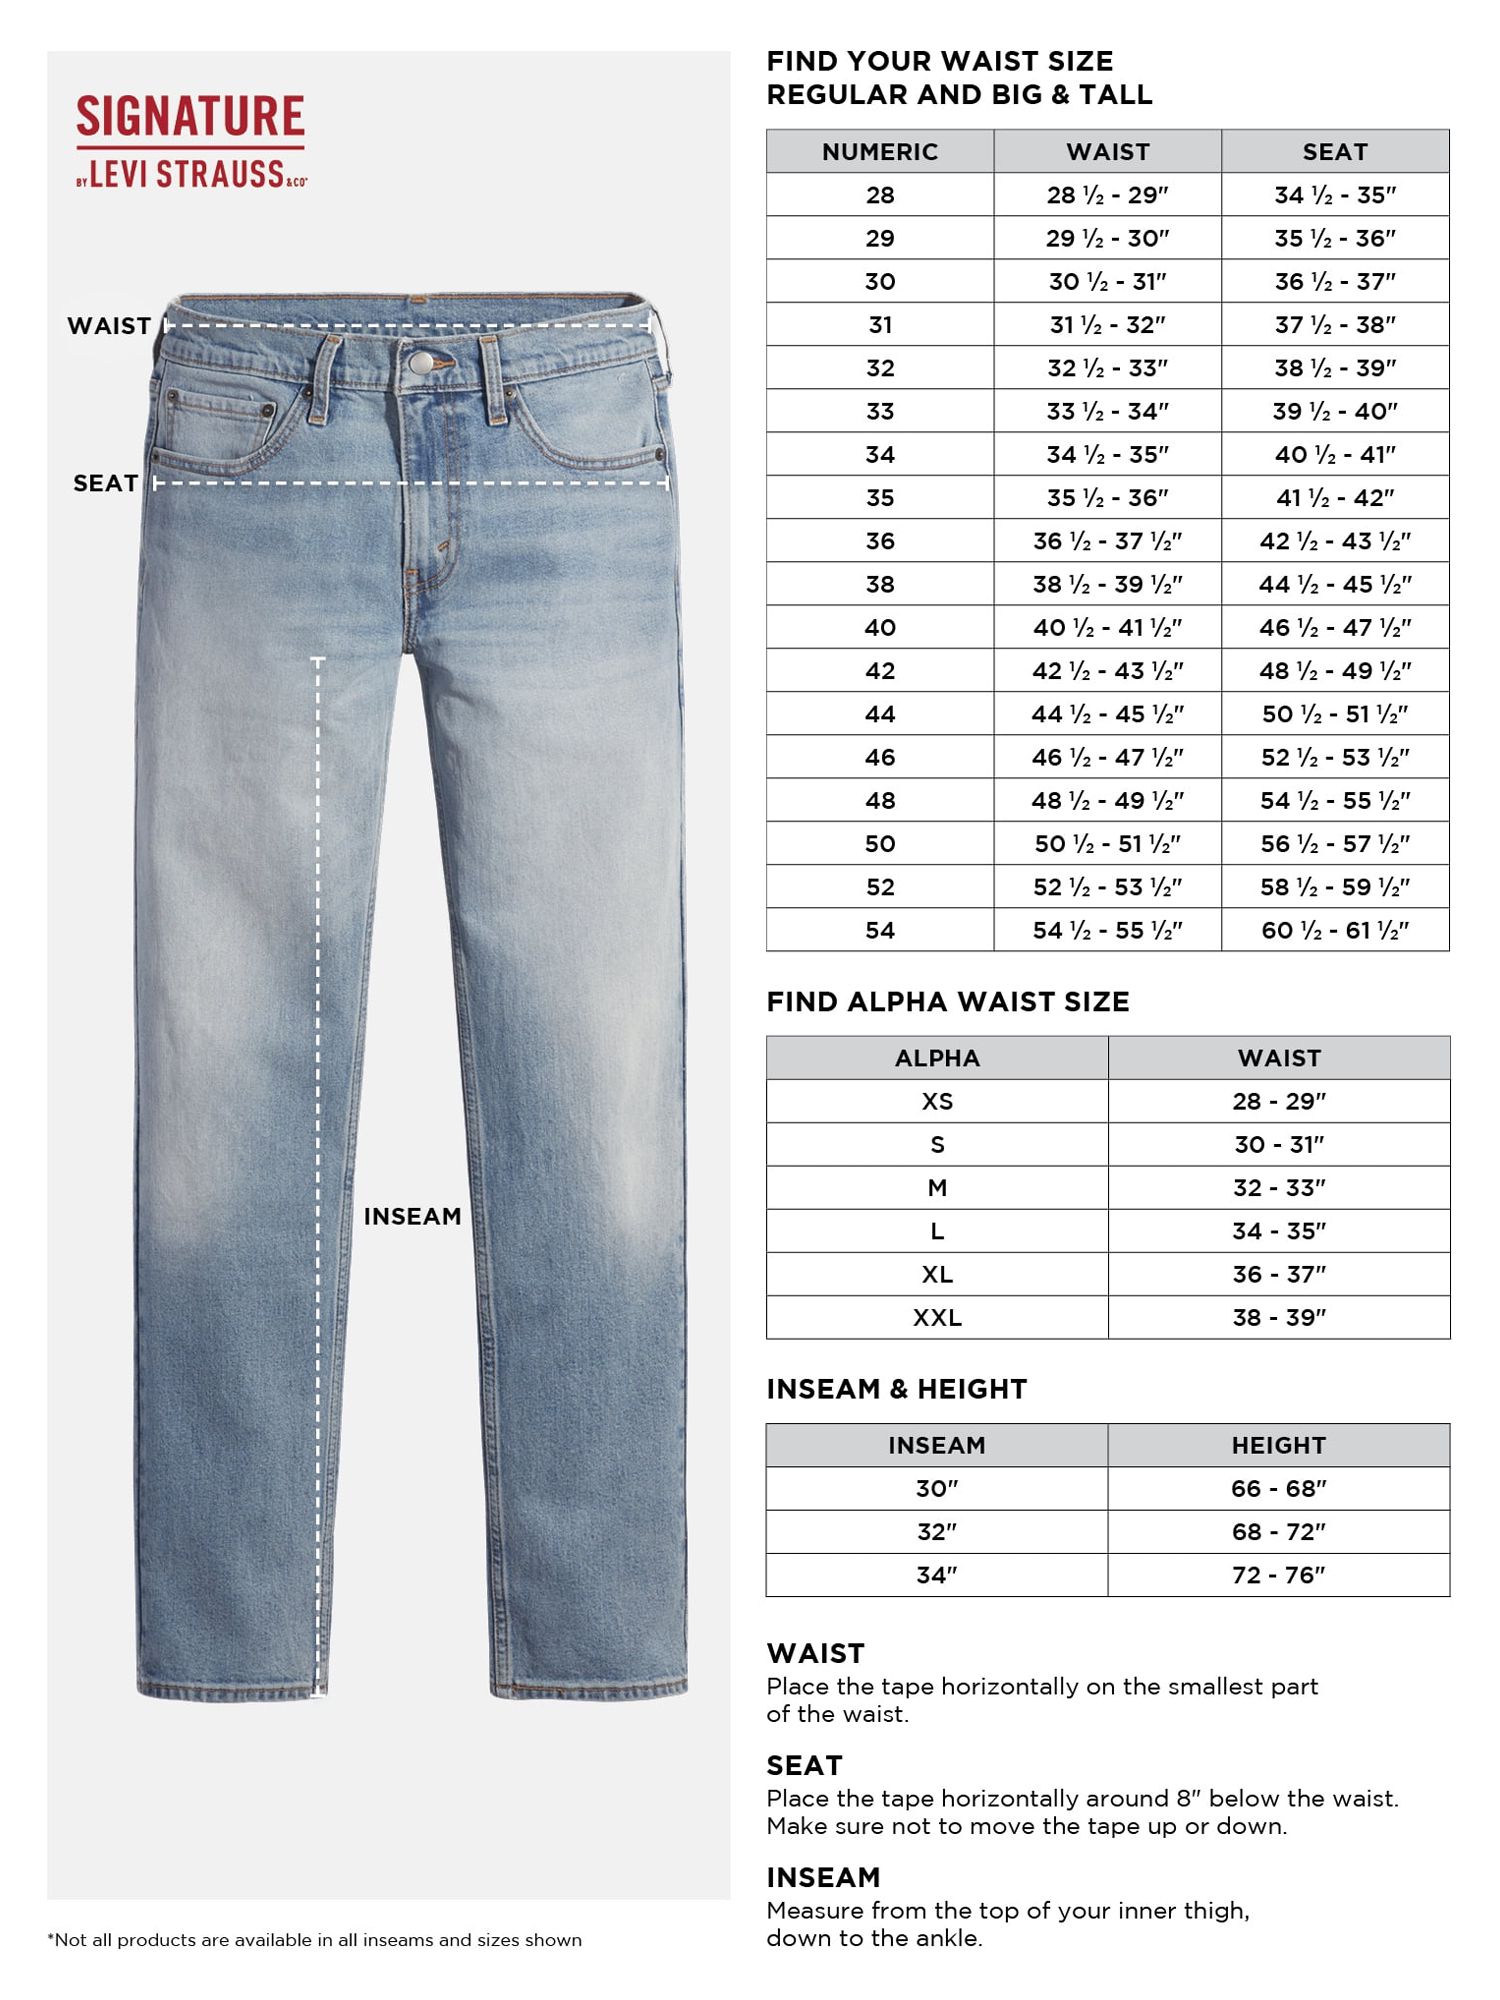 Signature by Levi Strauss & Co. Men’s and Big and Tall Slim Fit Jeans - image 5 of 6